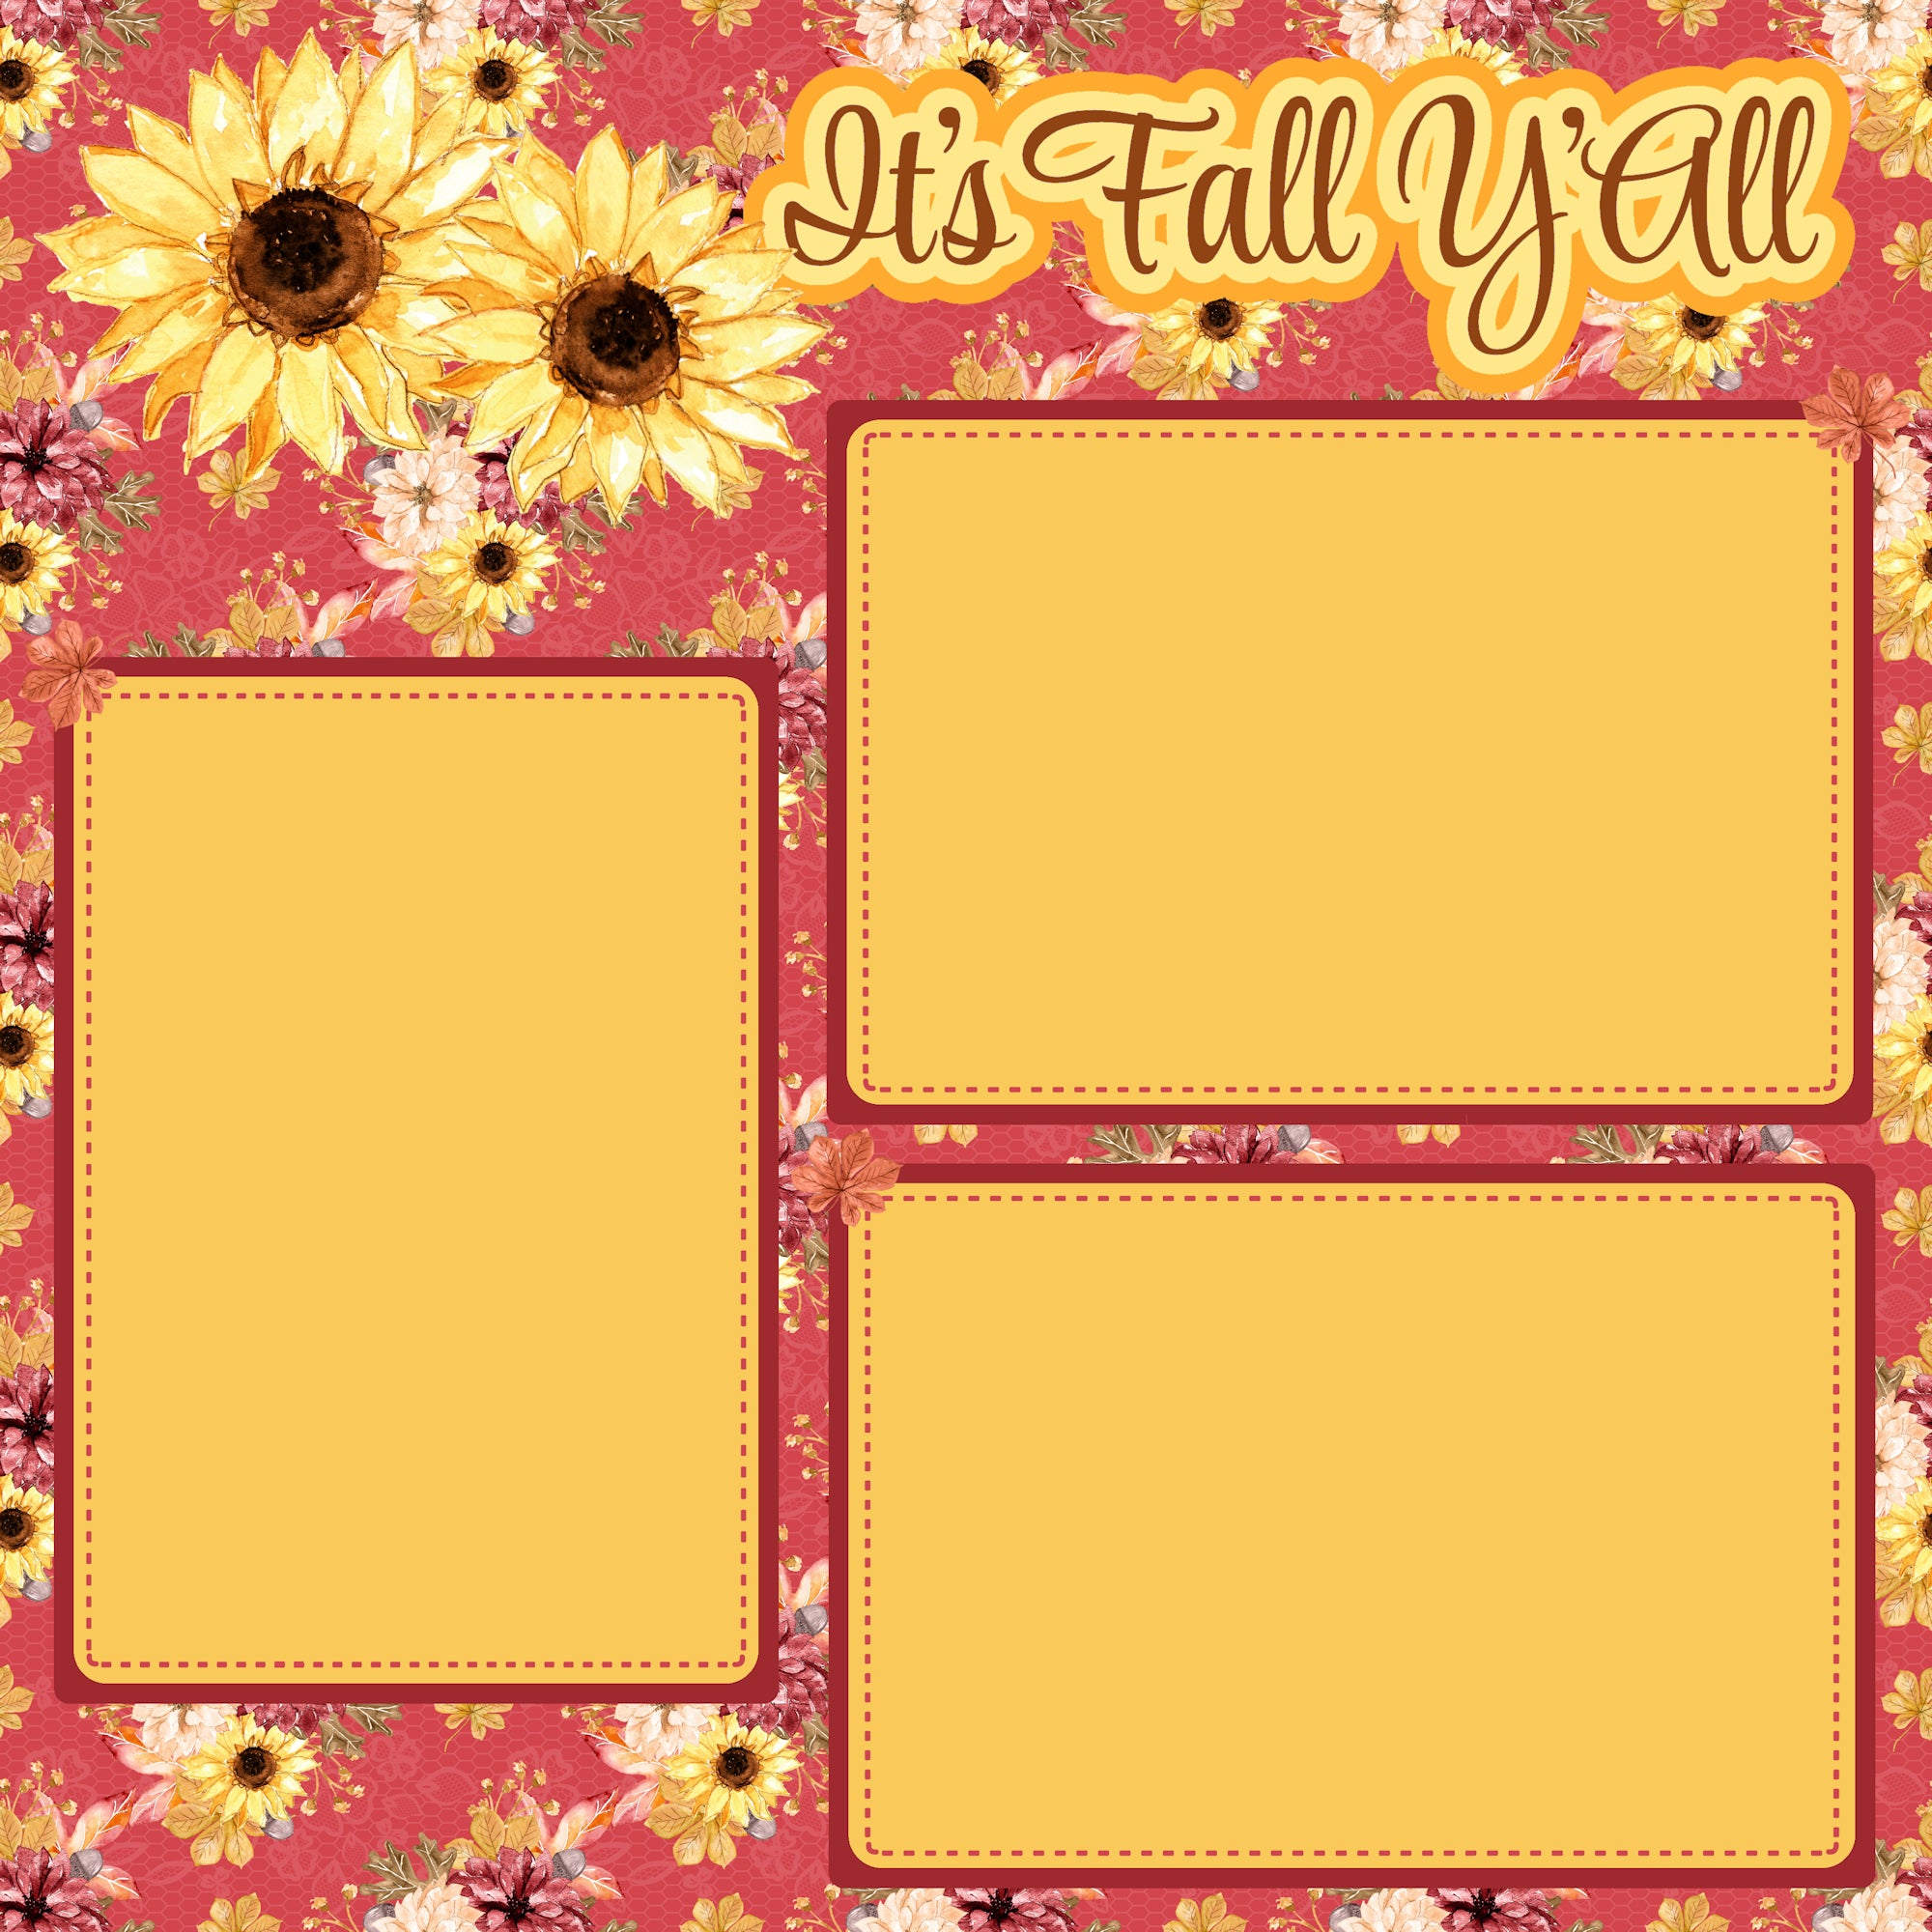 It's Fall Y'All (2) - 12 x 12 Premade, Printed Scrapbook Pages by SSC Designs